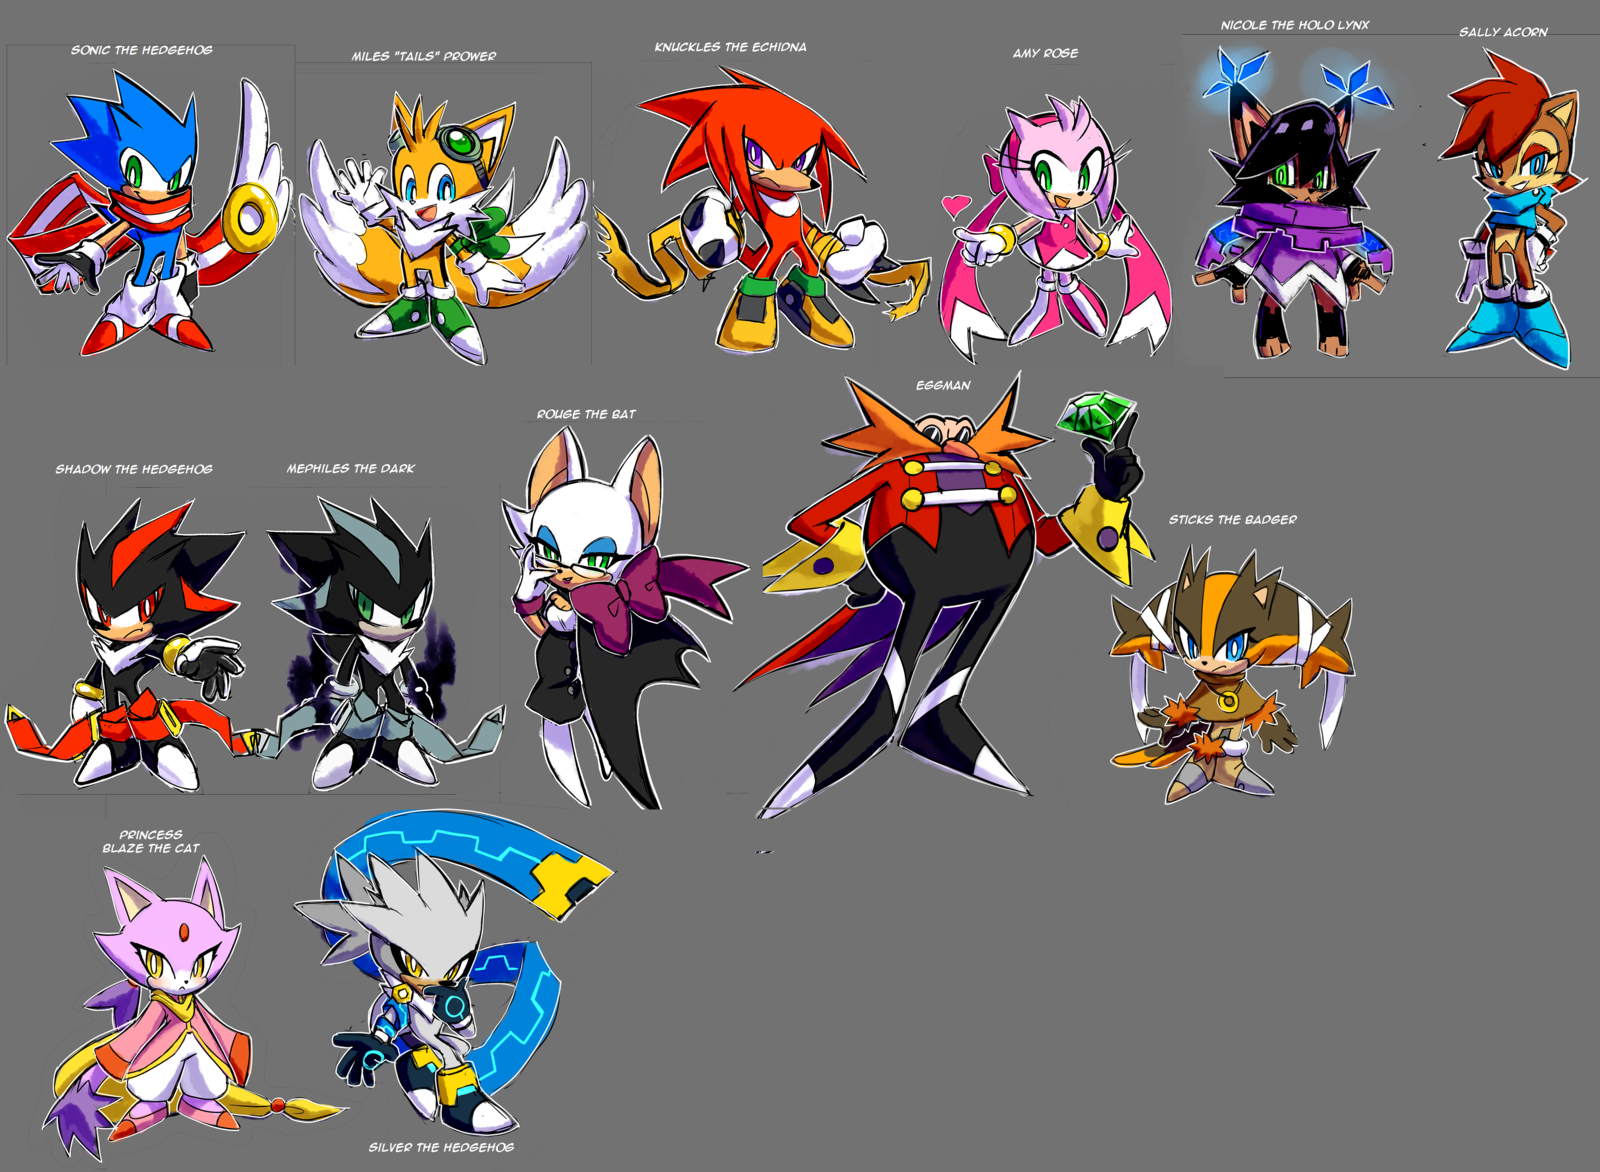 Amy Rose Knuckles The Echidna Mephiles The Dark Miles Quot Tails Quot Prower Nicole The Holo Lynx Ro 1600x1172